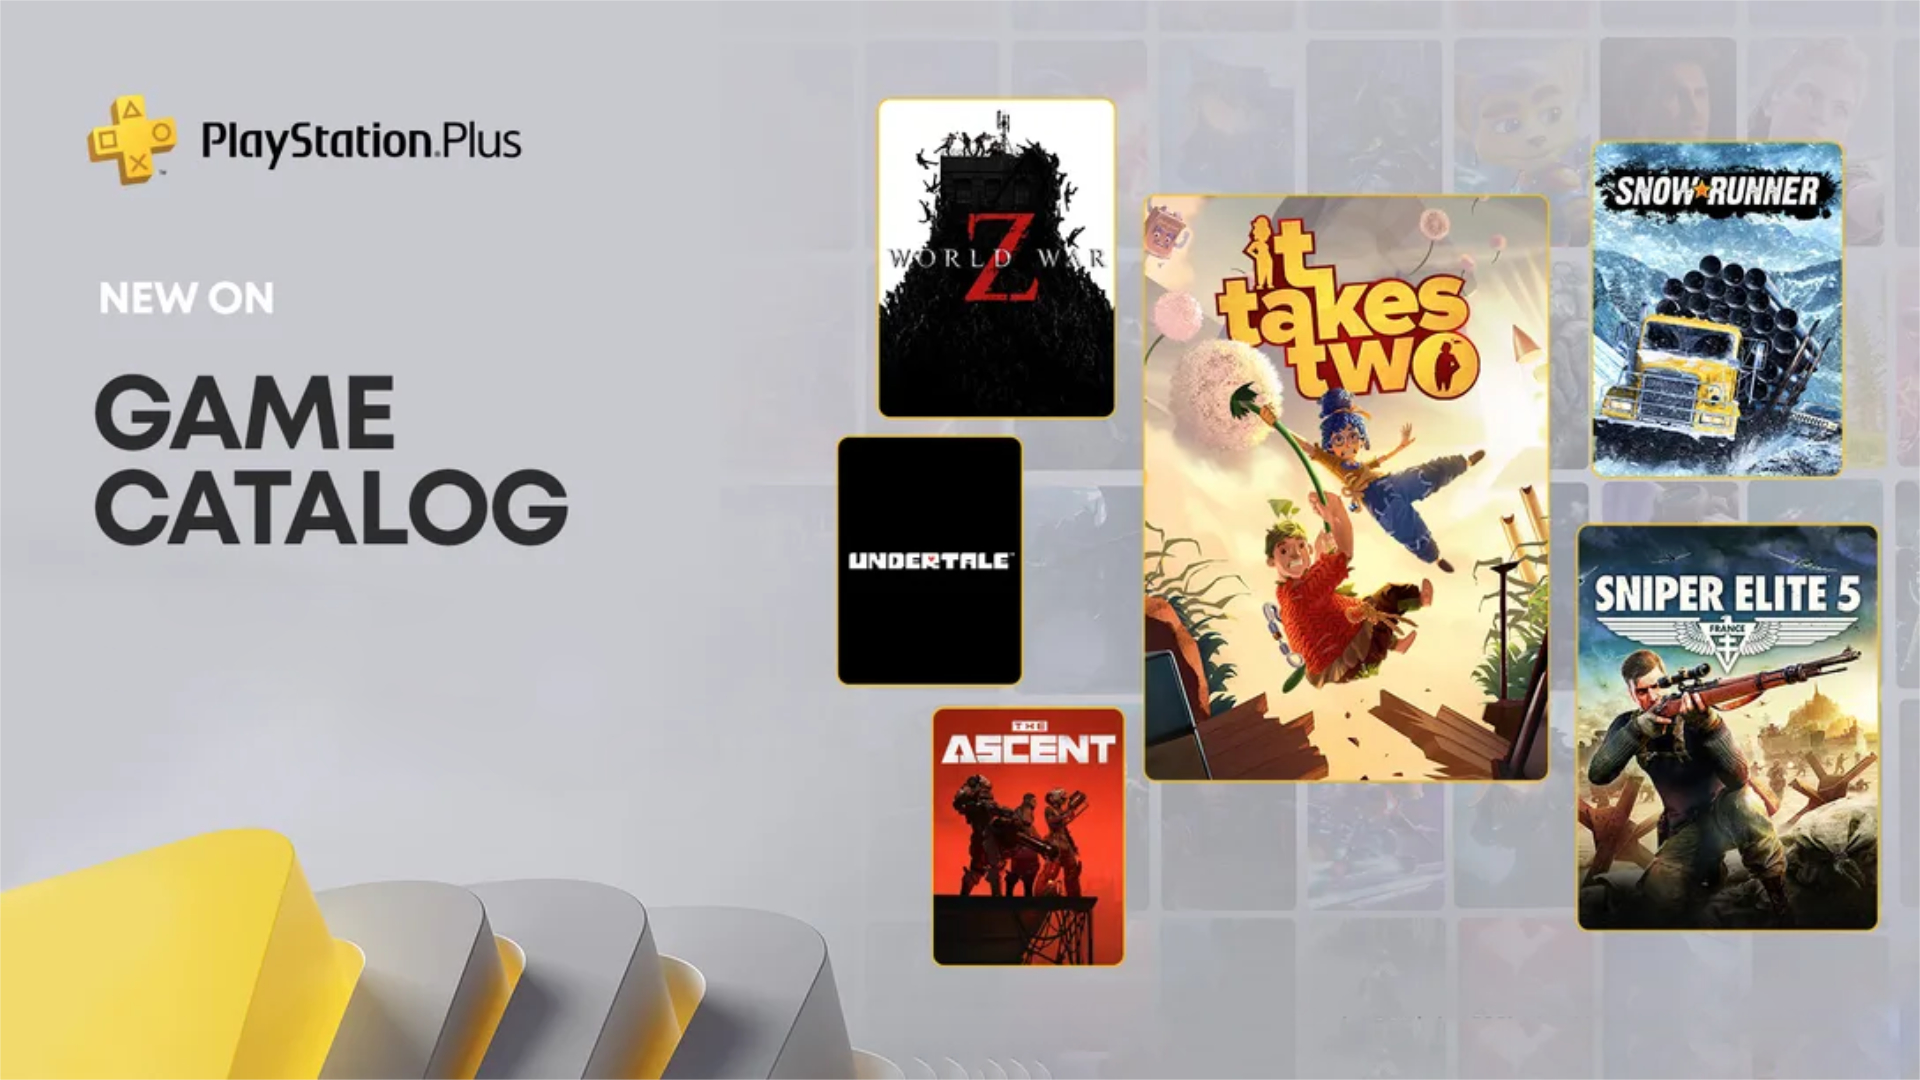 PlayStation Plus Free Games Announced for November, Includes Bugsnax as PS5  Exclusive